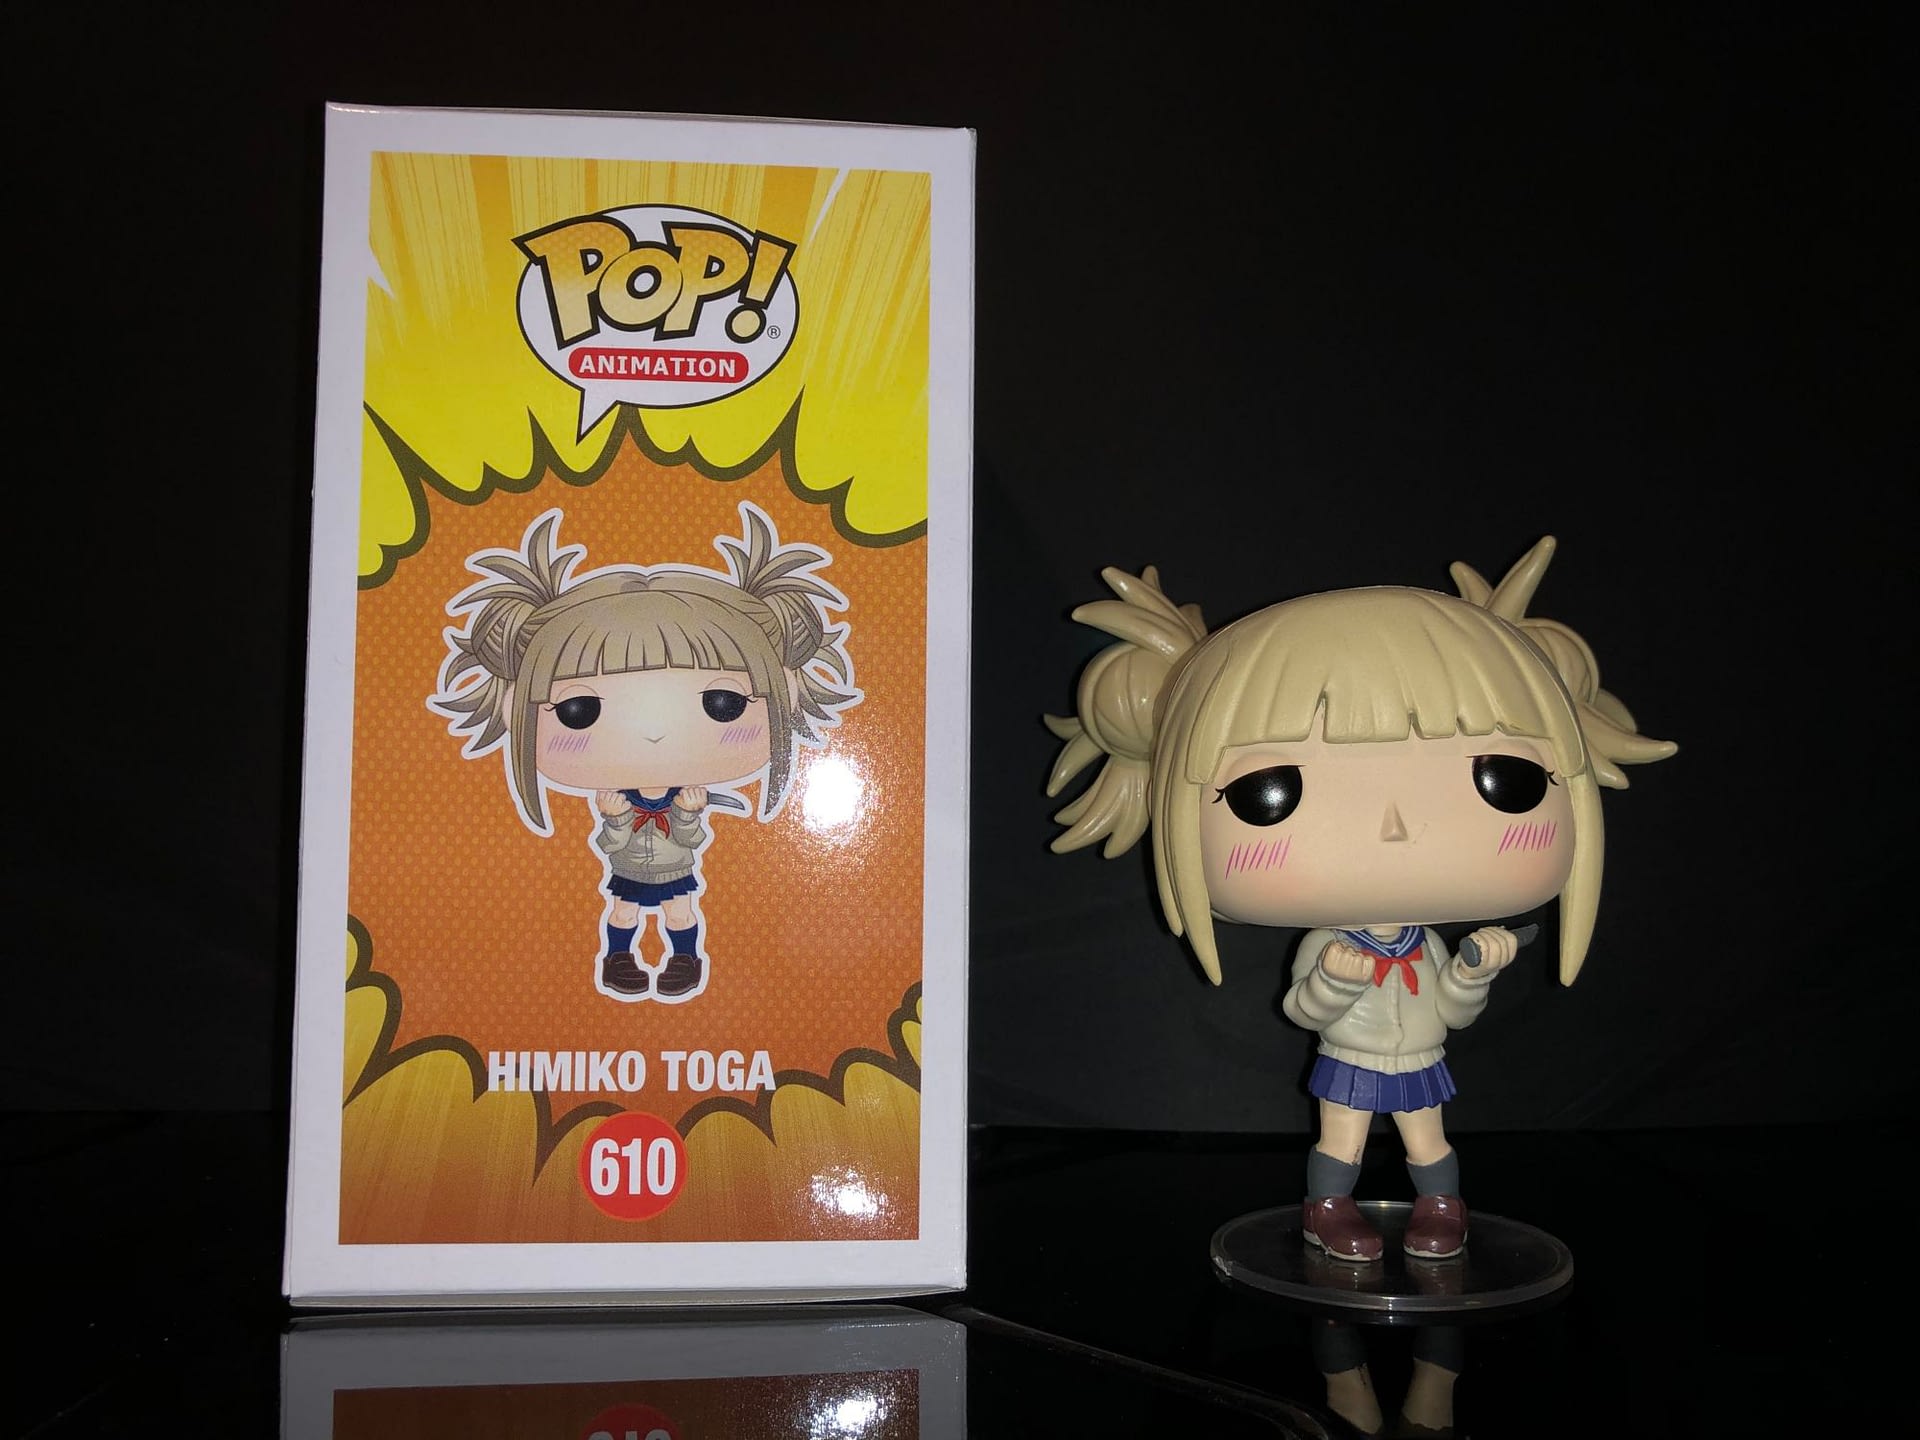 League of Villains from MHA Get Their Own Funko Pops [Review]